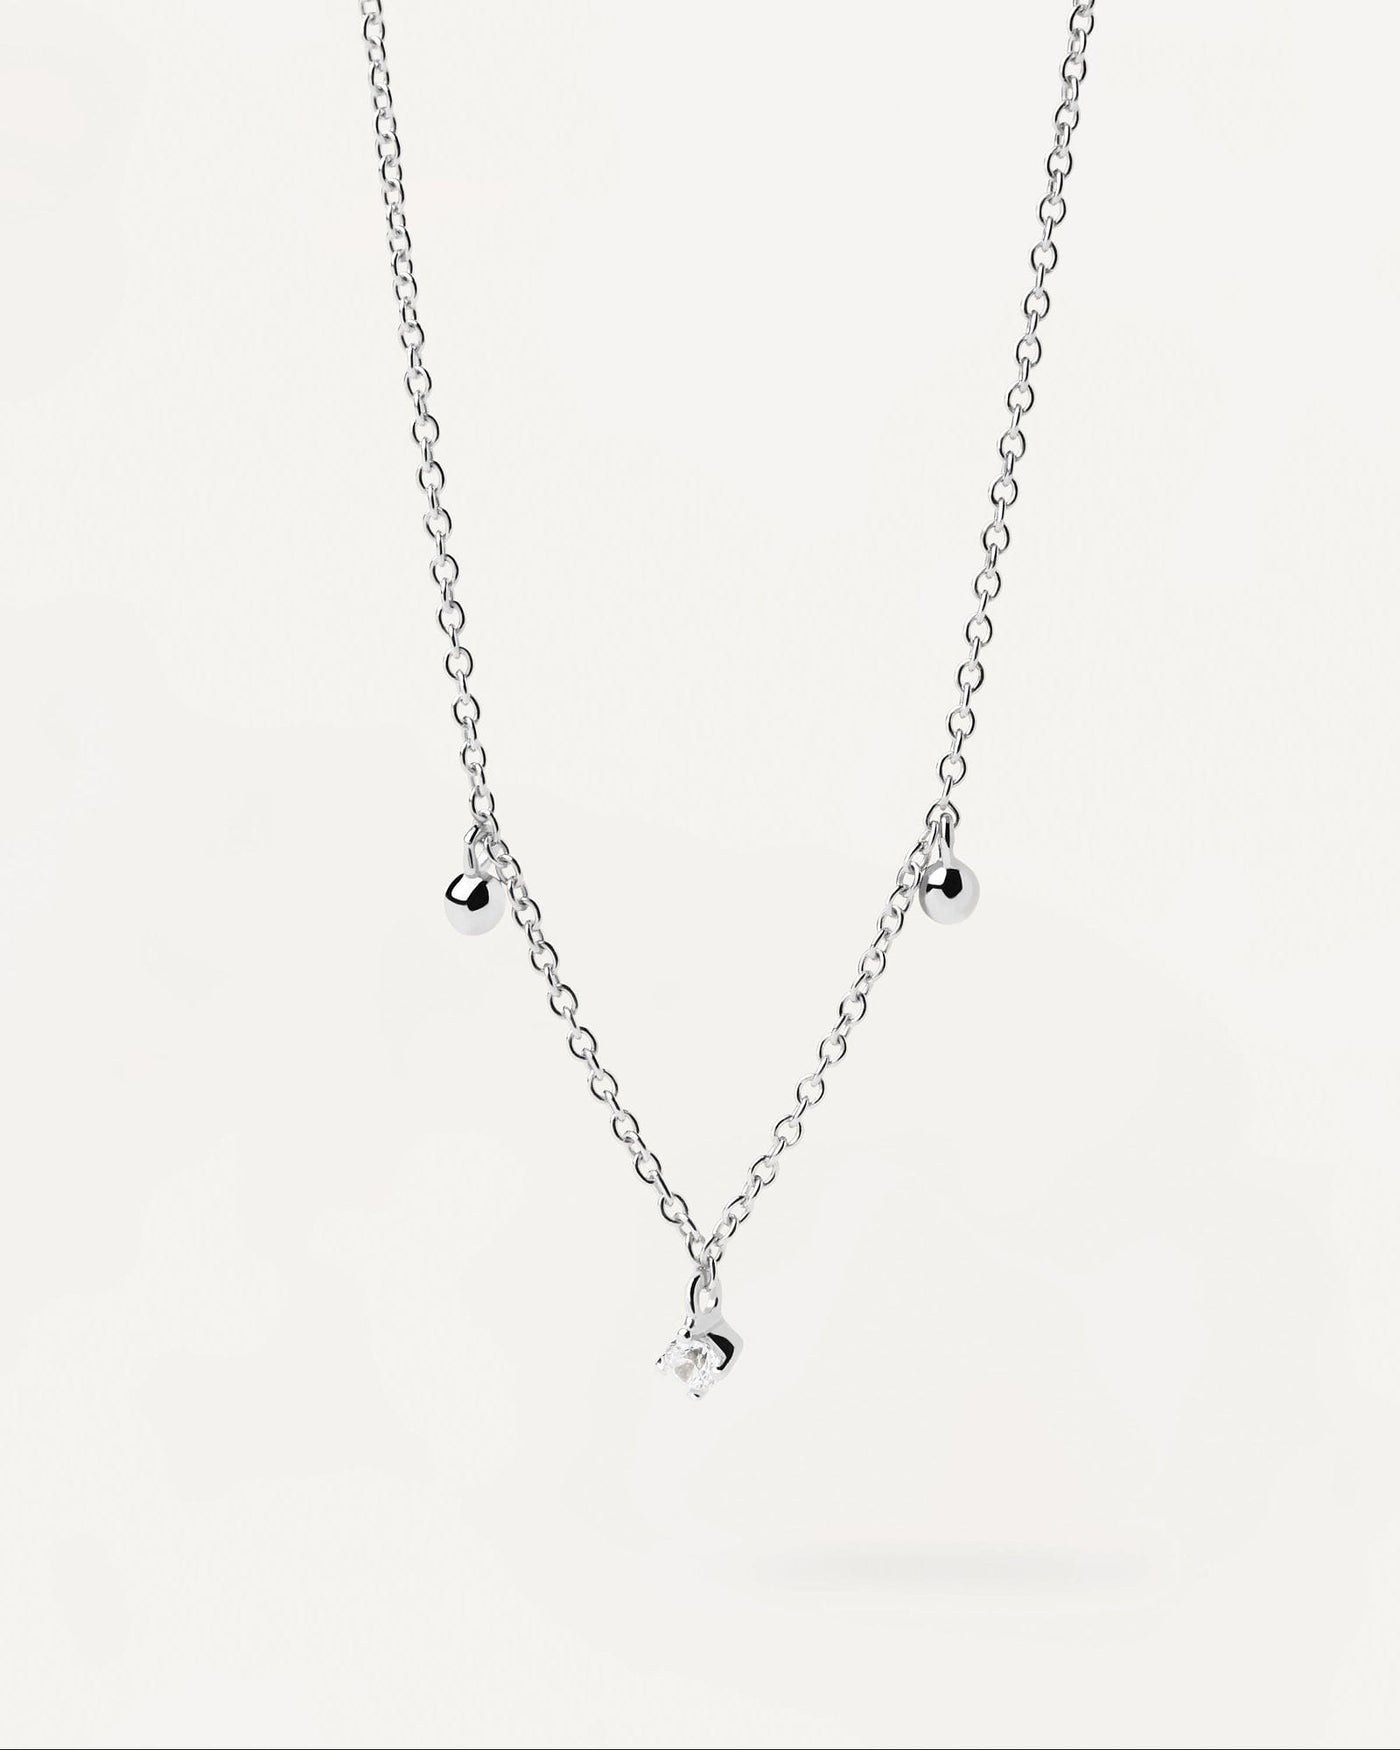 2024 Selection | Love Triangle Silver Necklace. Large link necklace in sterling silver set with white zirconia. Get the latest arrival from PDPAOLA. Place your order safely and get this Best Seller. Free Shipping.